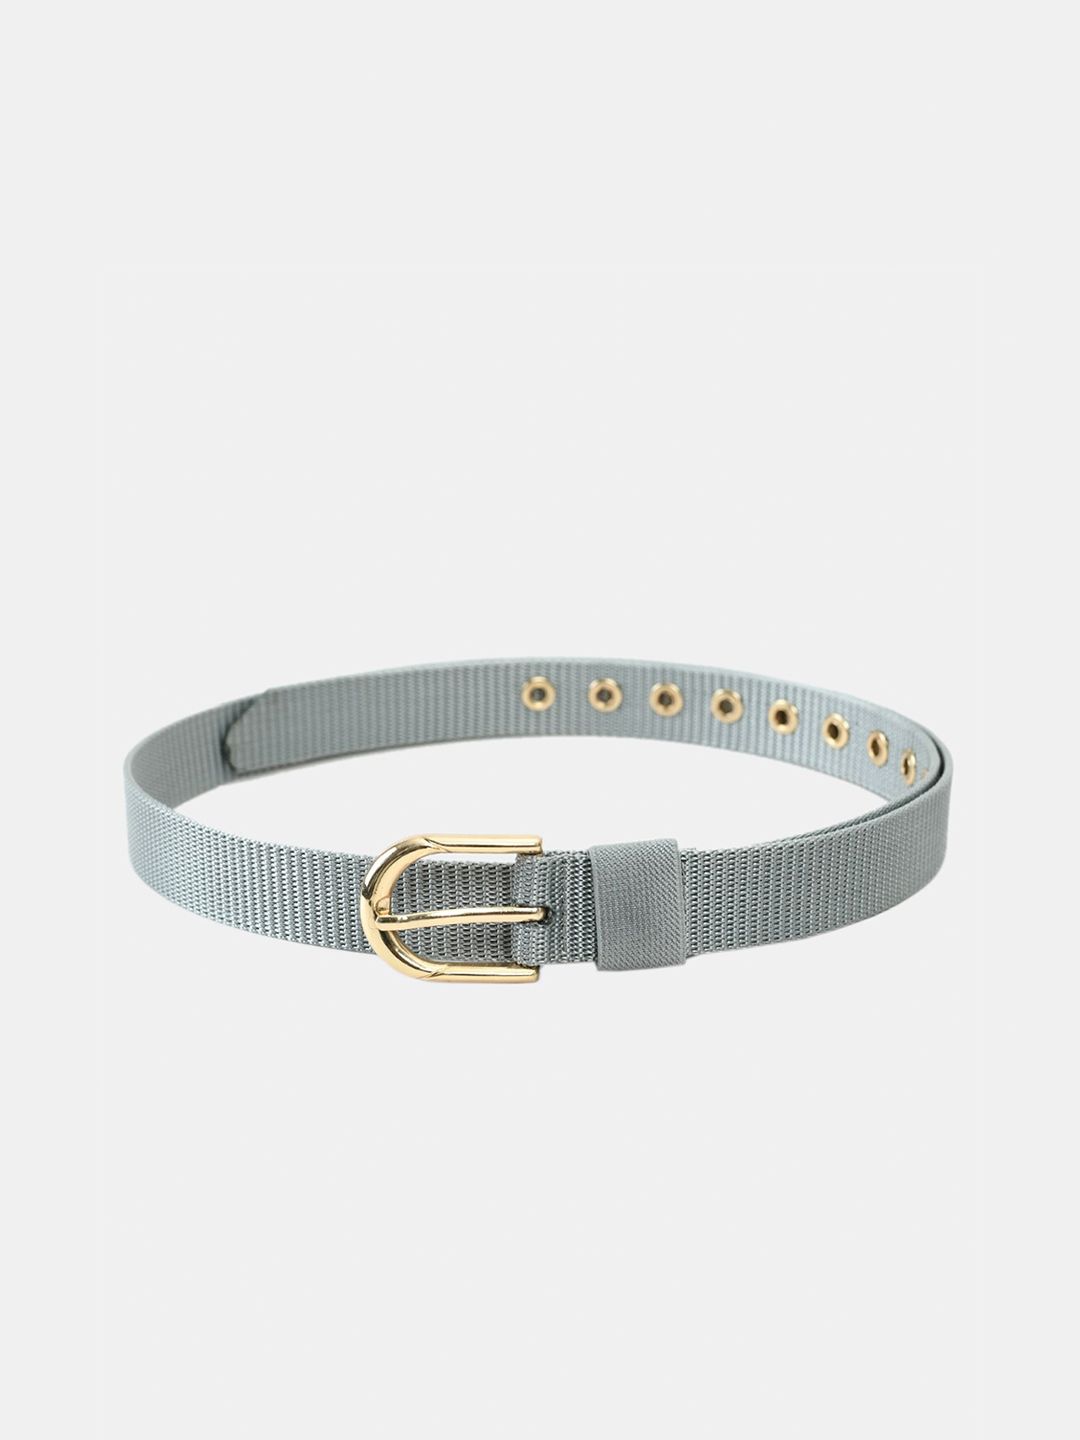 Kastner Women Silver-Toned Textured Canvas Belt Price in India